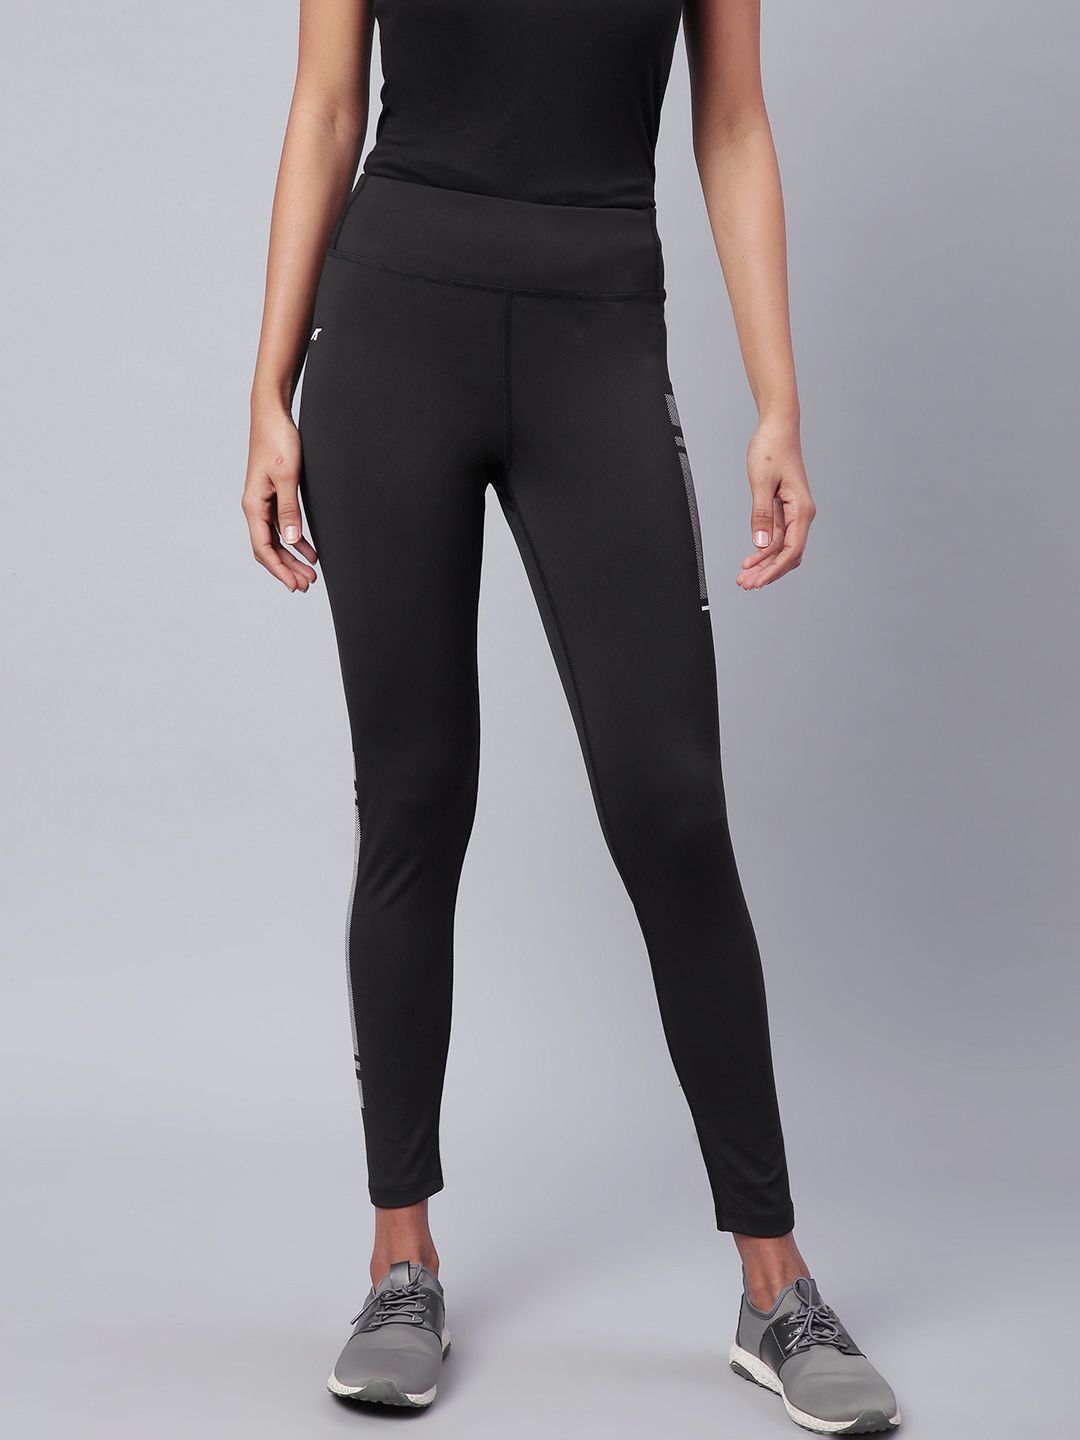 Alcis Women Black Solid Secure Fit Cropped Training Tights Price in India